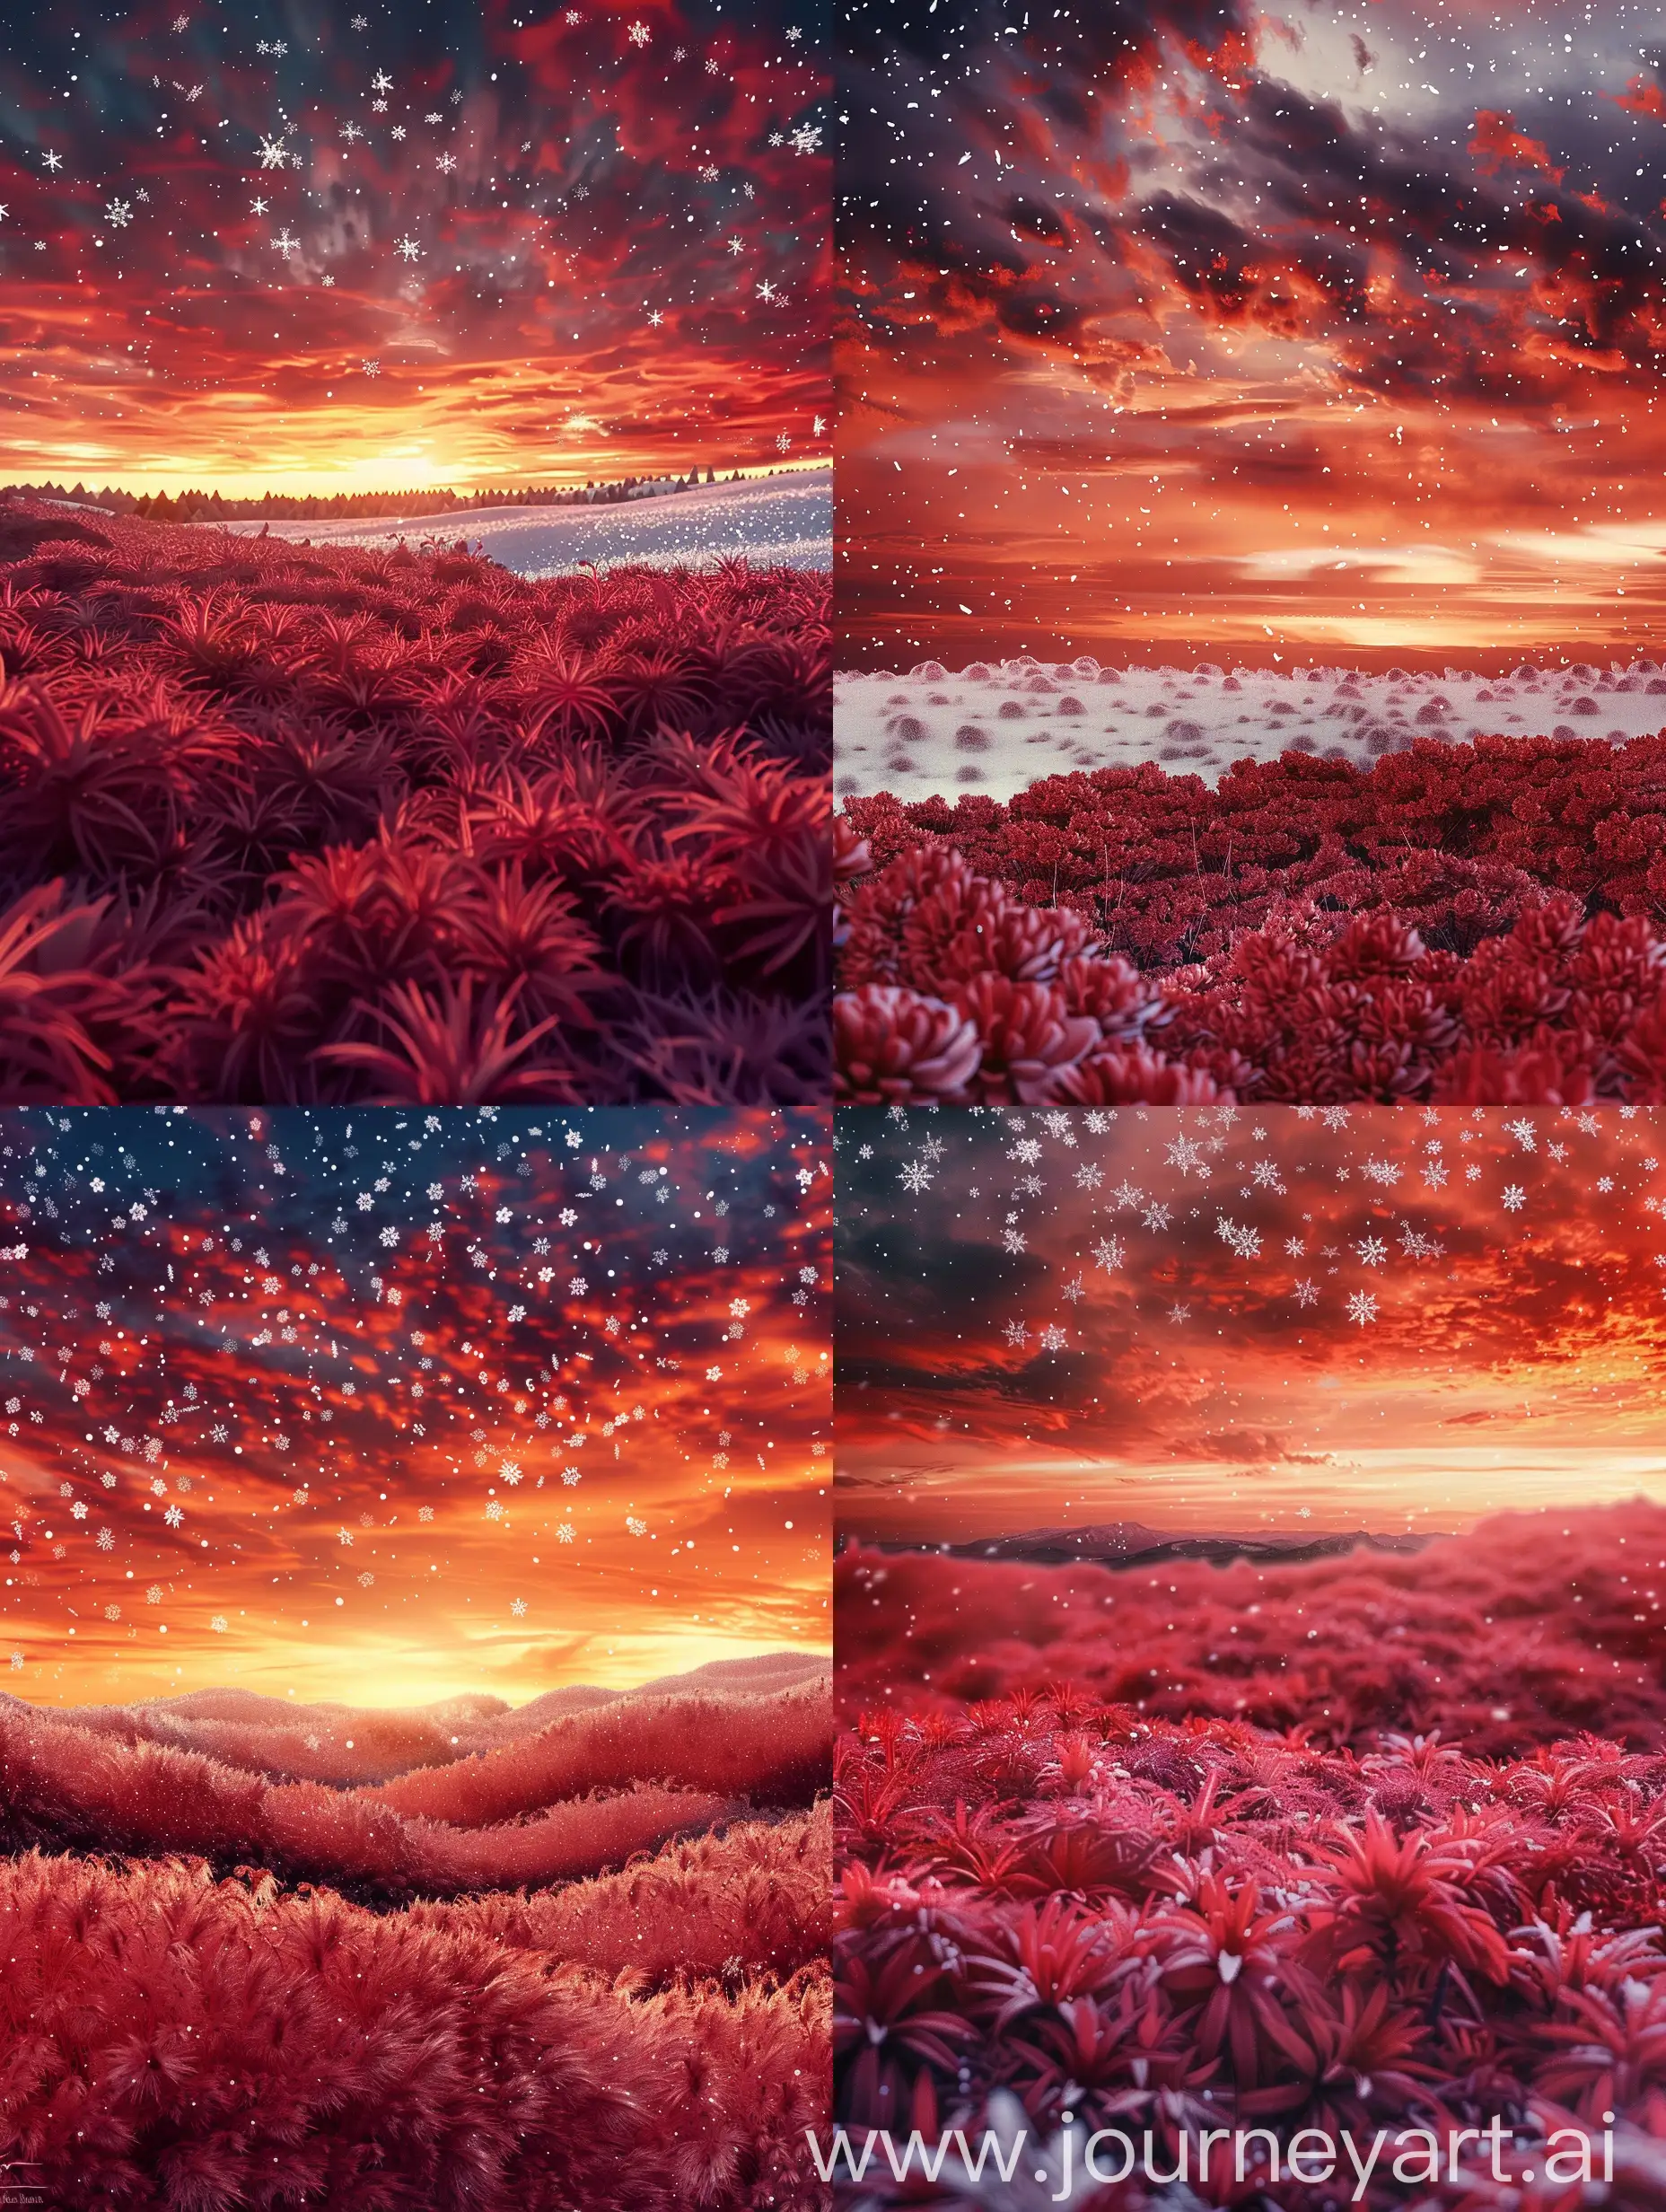 Surreal-Dusk-Landscape-with-Red-Flora-and-Falling-Snowflakes